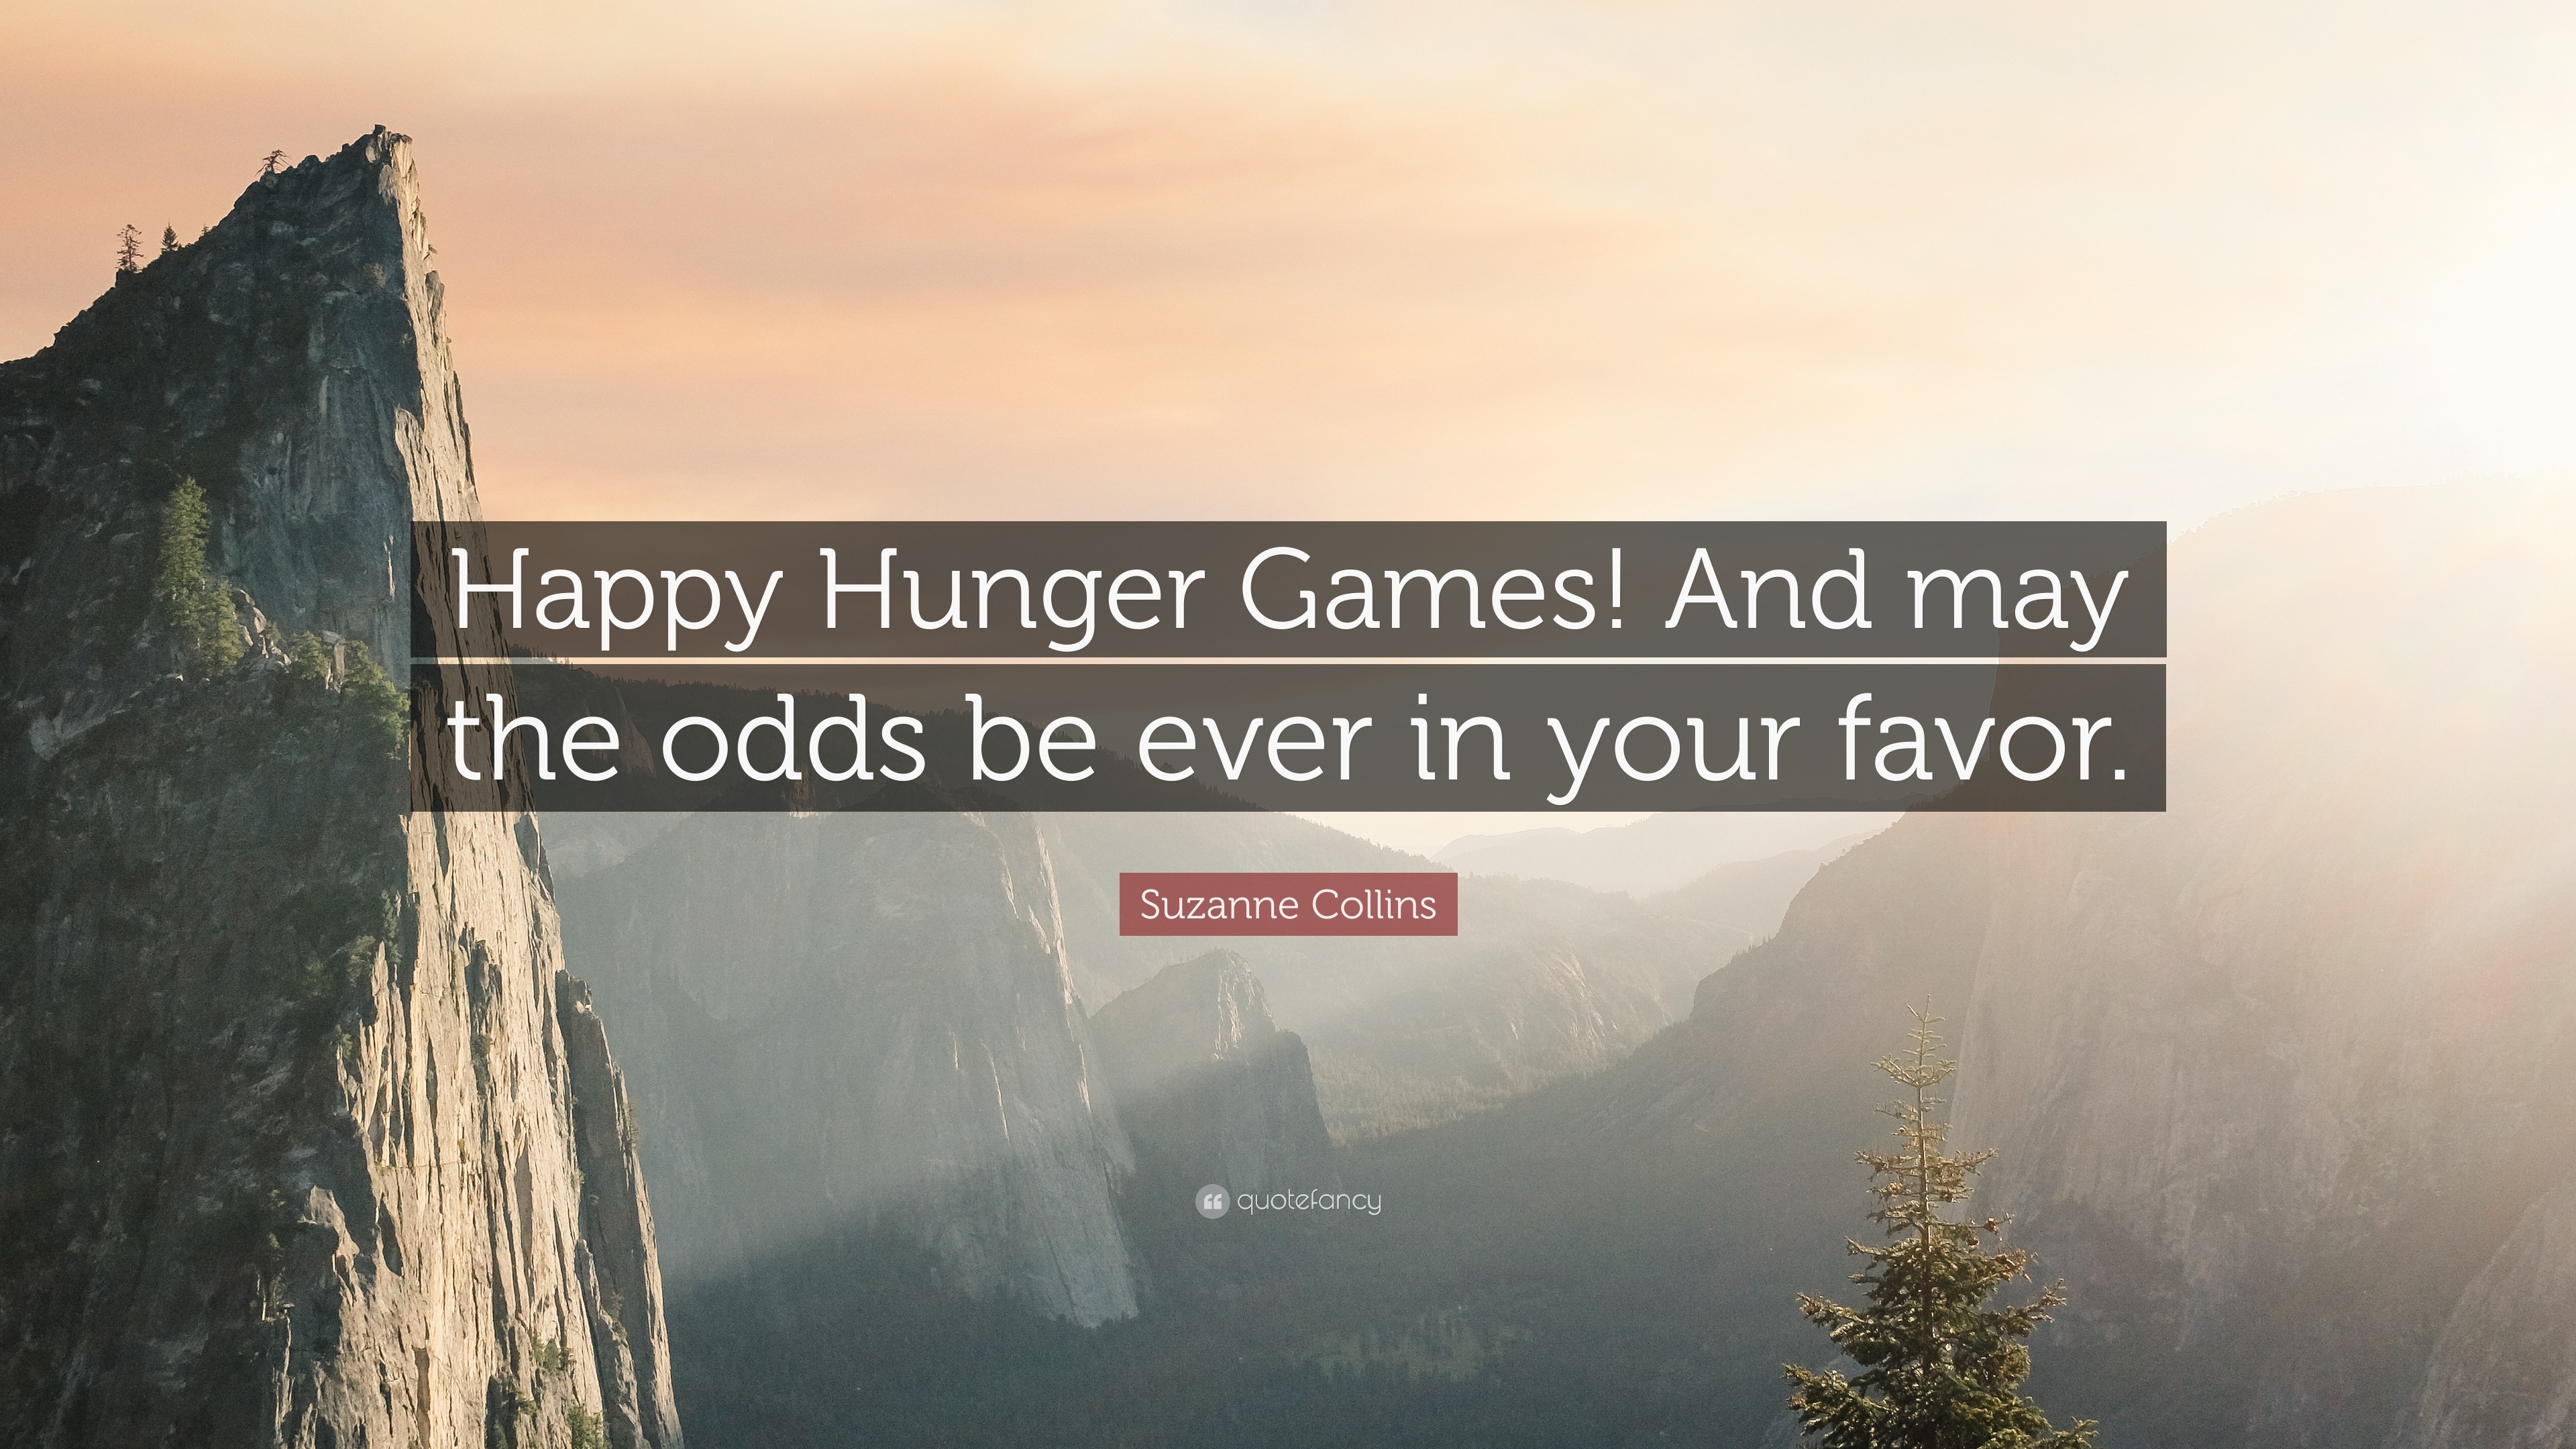 hunger games may the odds be ever in your favor quote